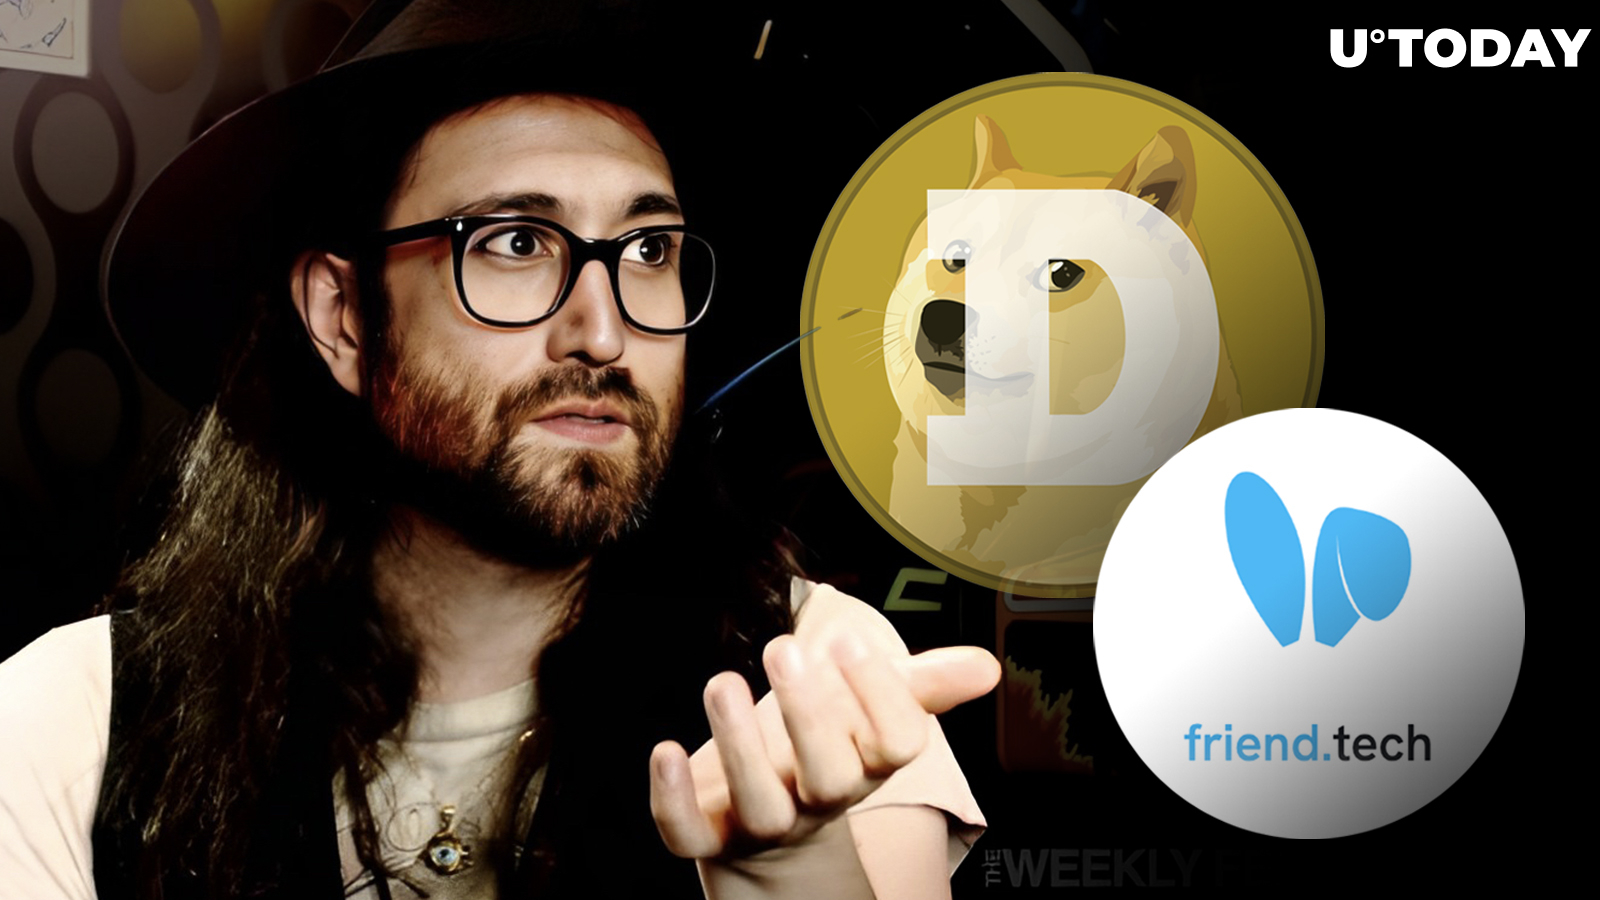 John Lennon's Son and Dogecoin (DOGE) Creator React to Friend Tech Key Prices